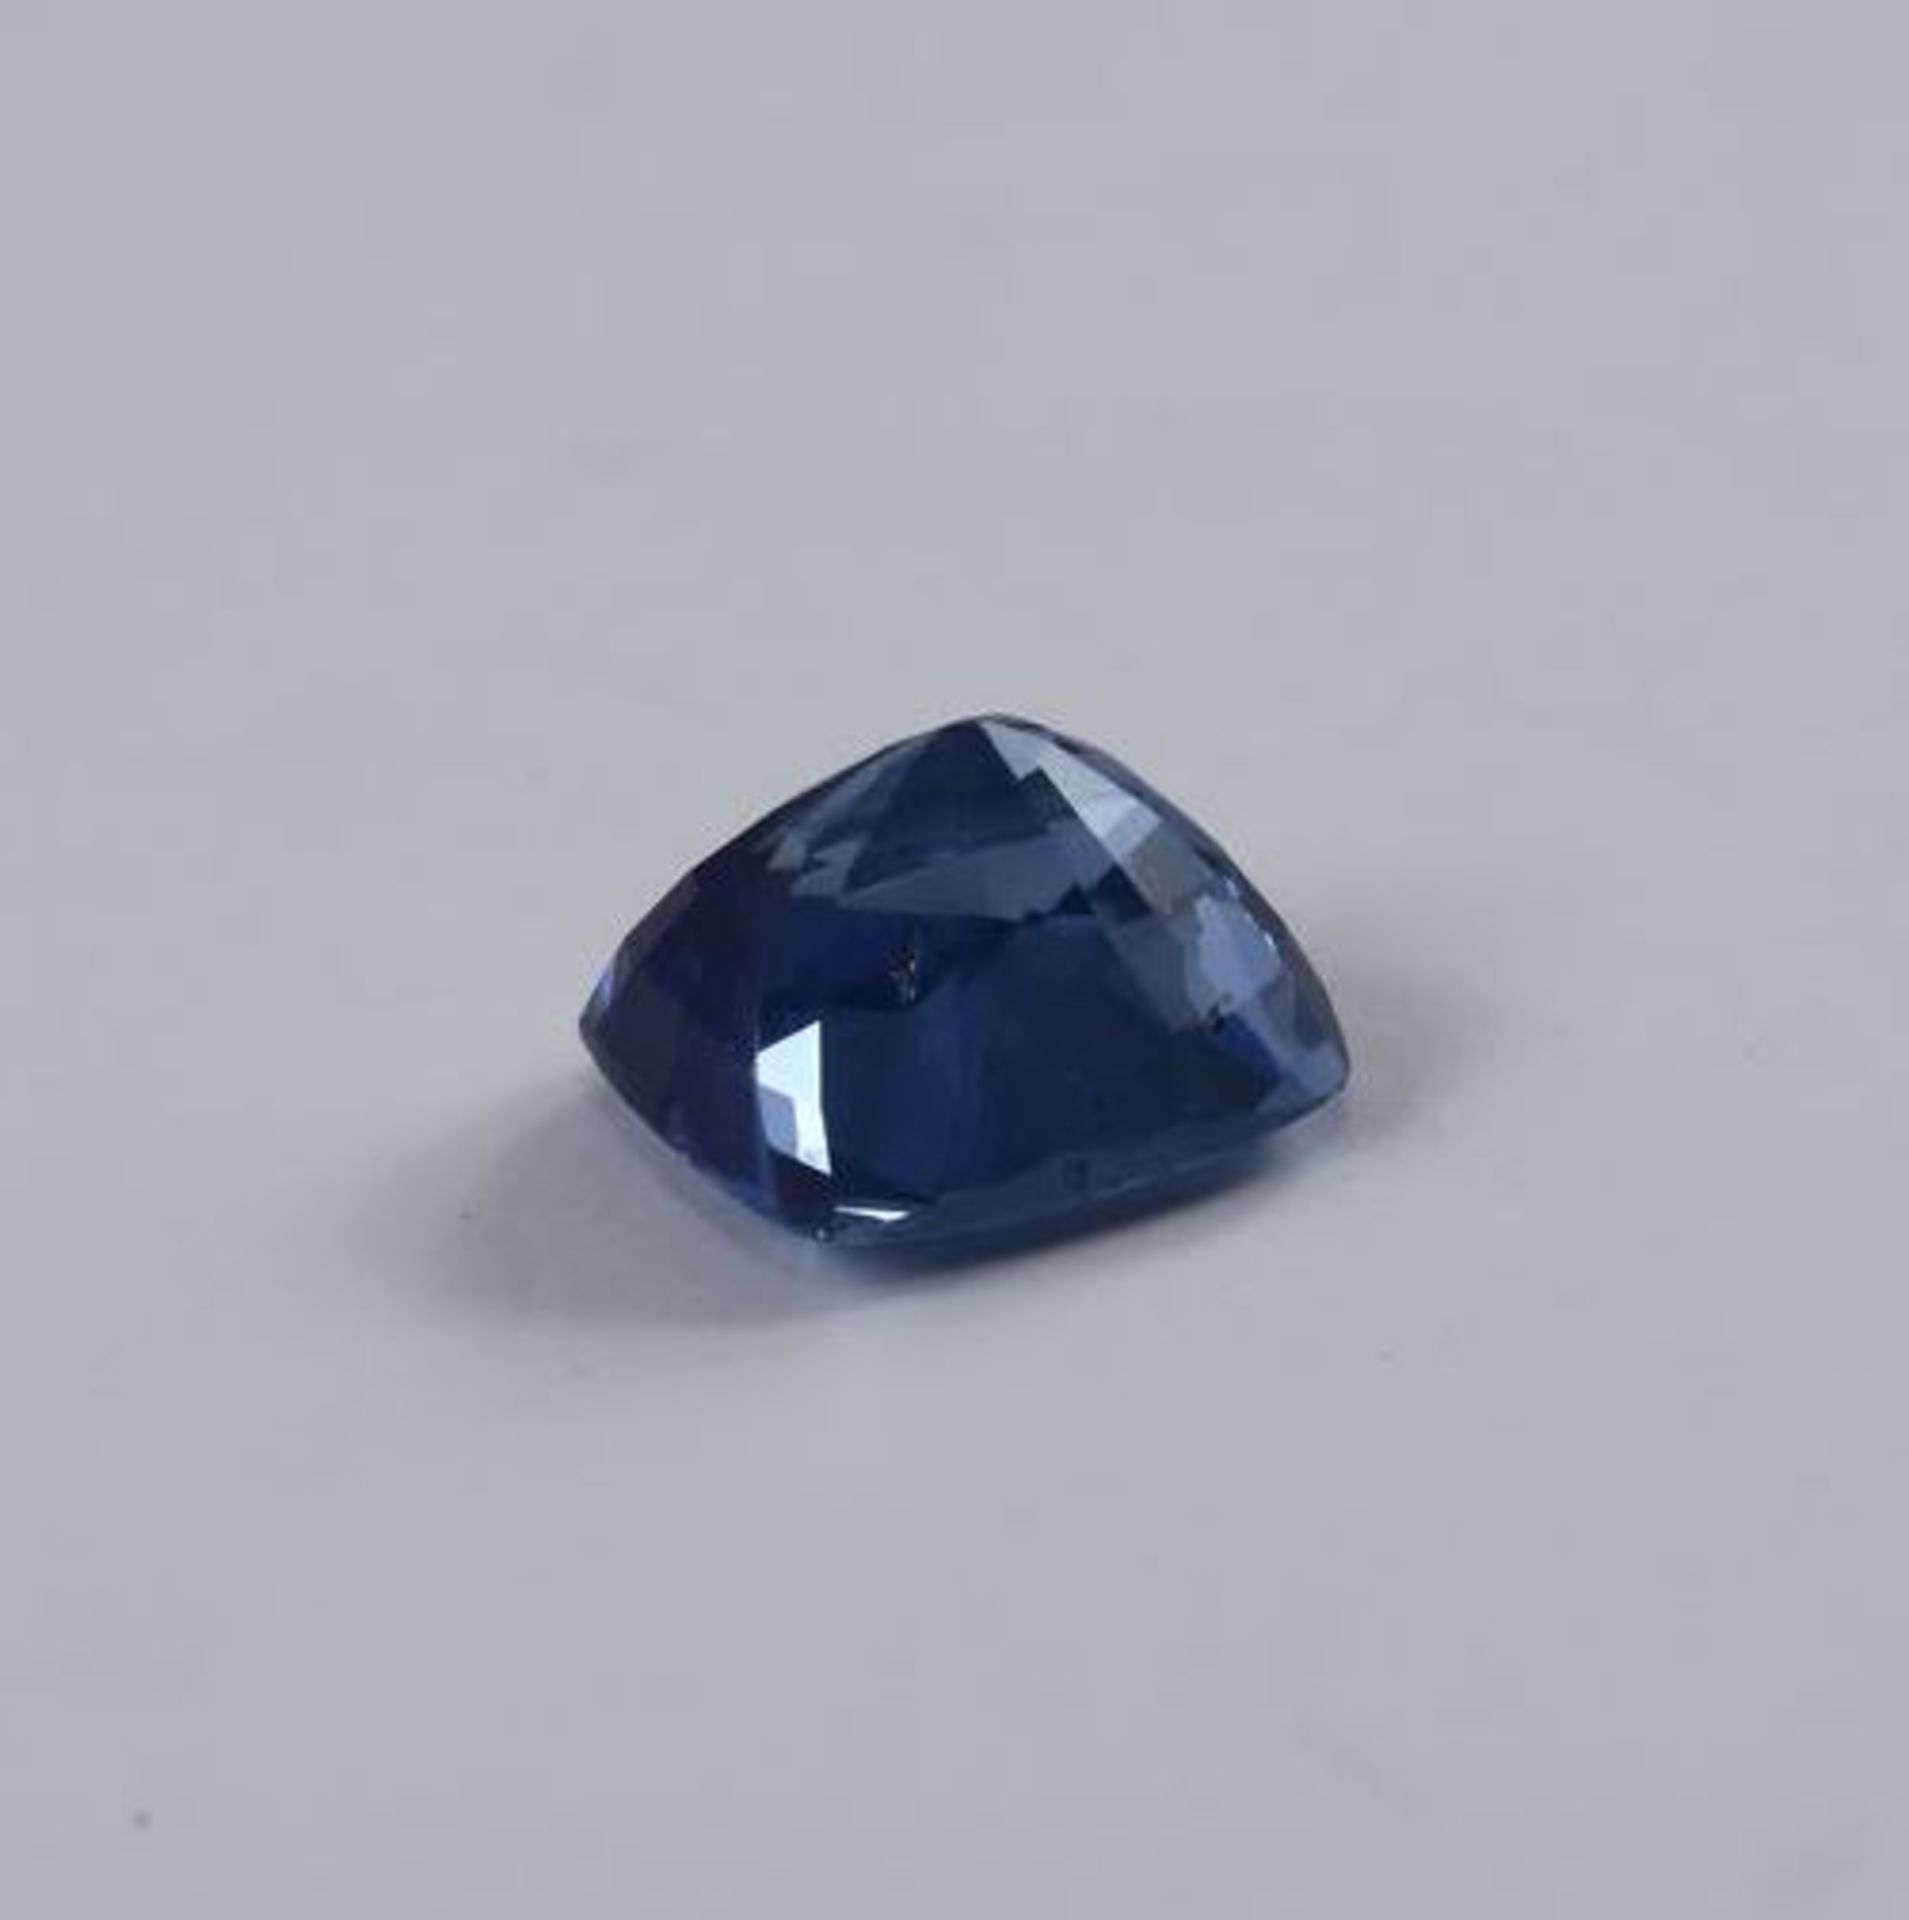 GIA Certified 5.03 ct. Blue Sapphire Untreated - Image 10 of 10